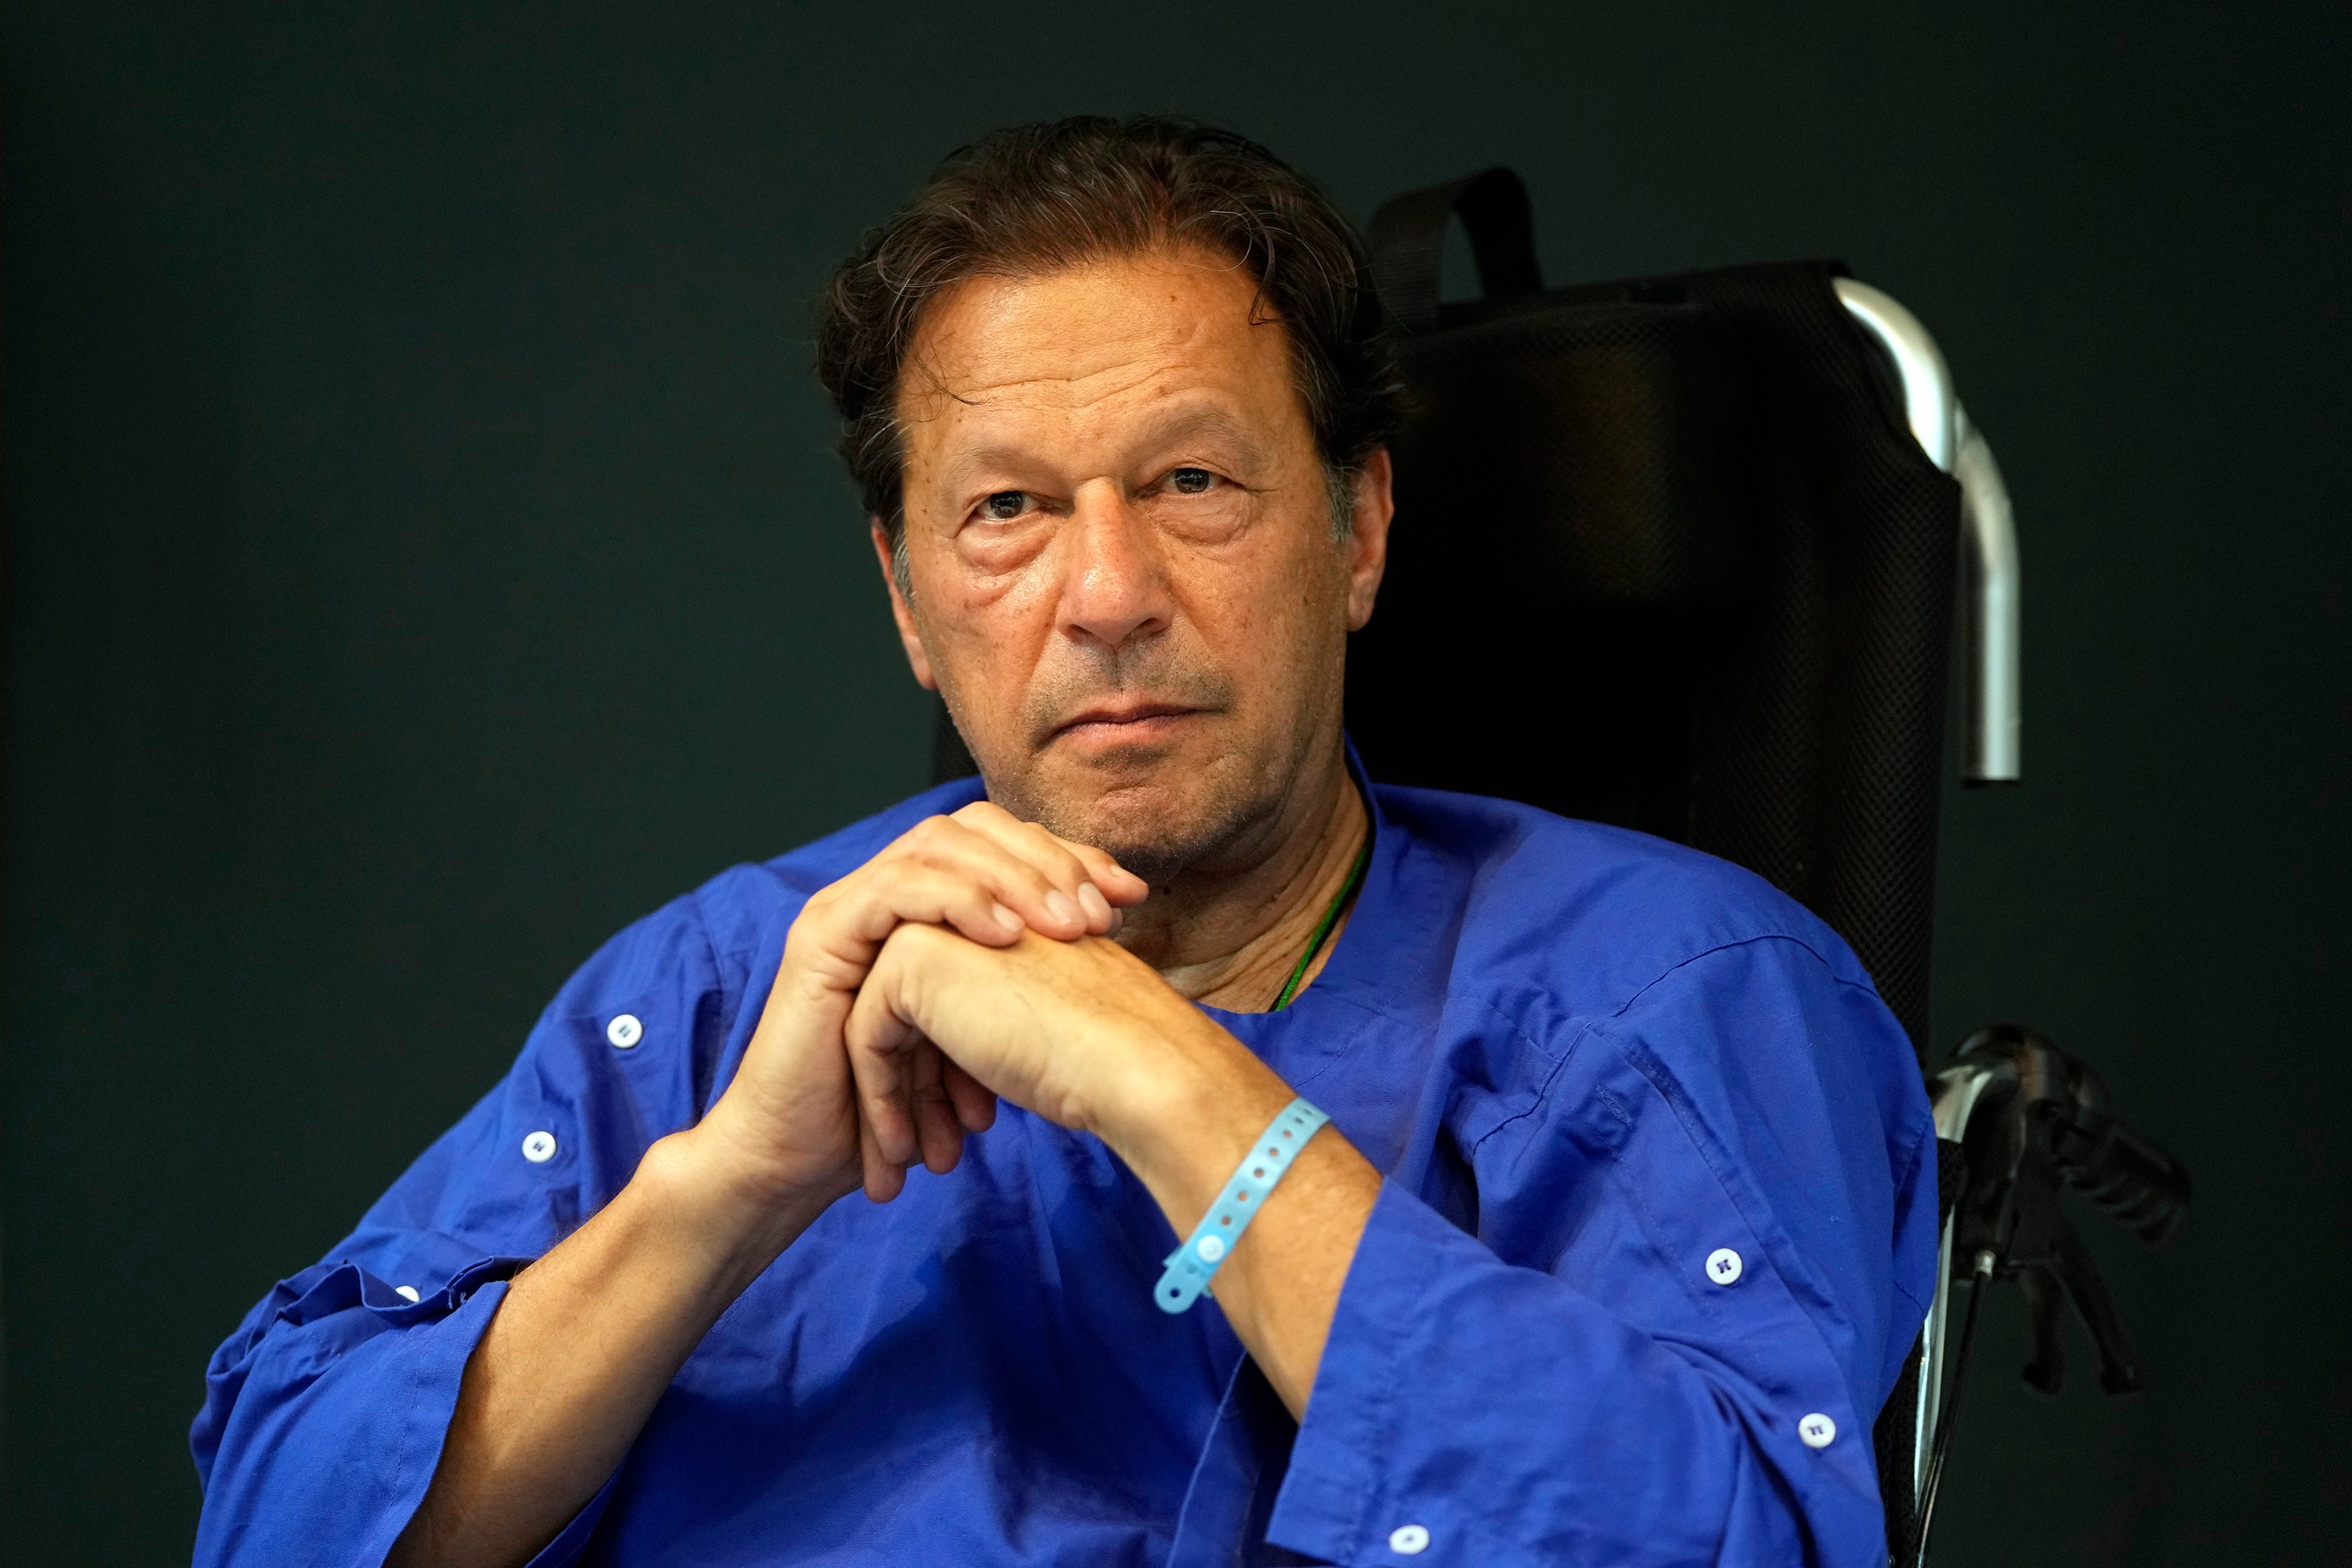 Imran Khan recovering from an assassination attempt last year